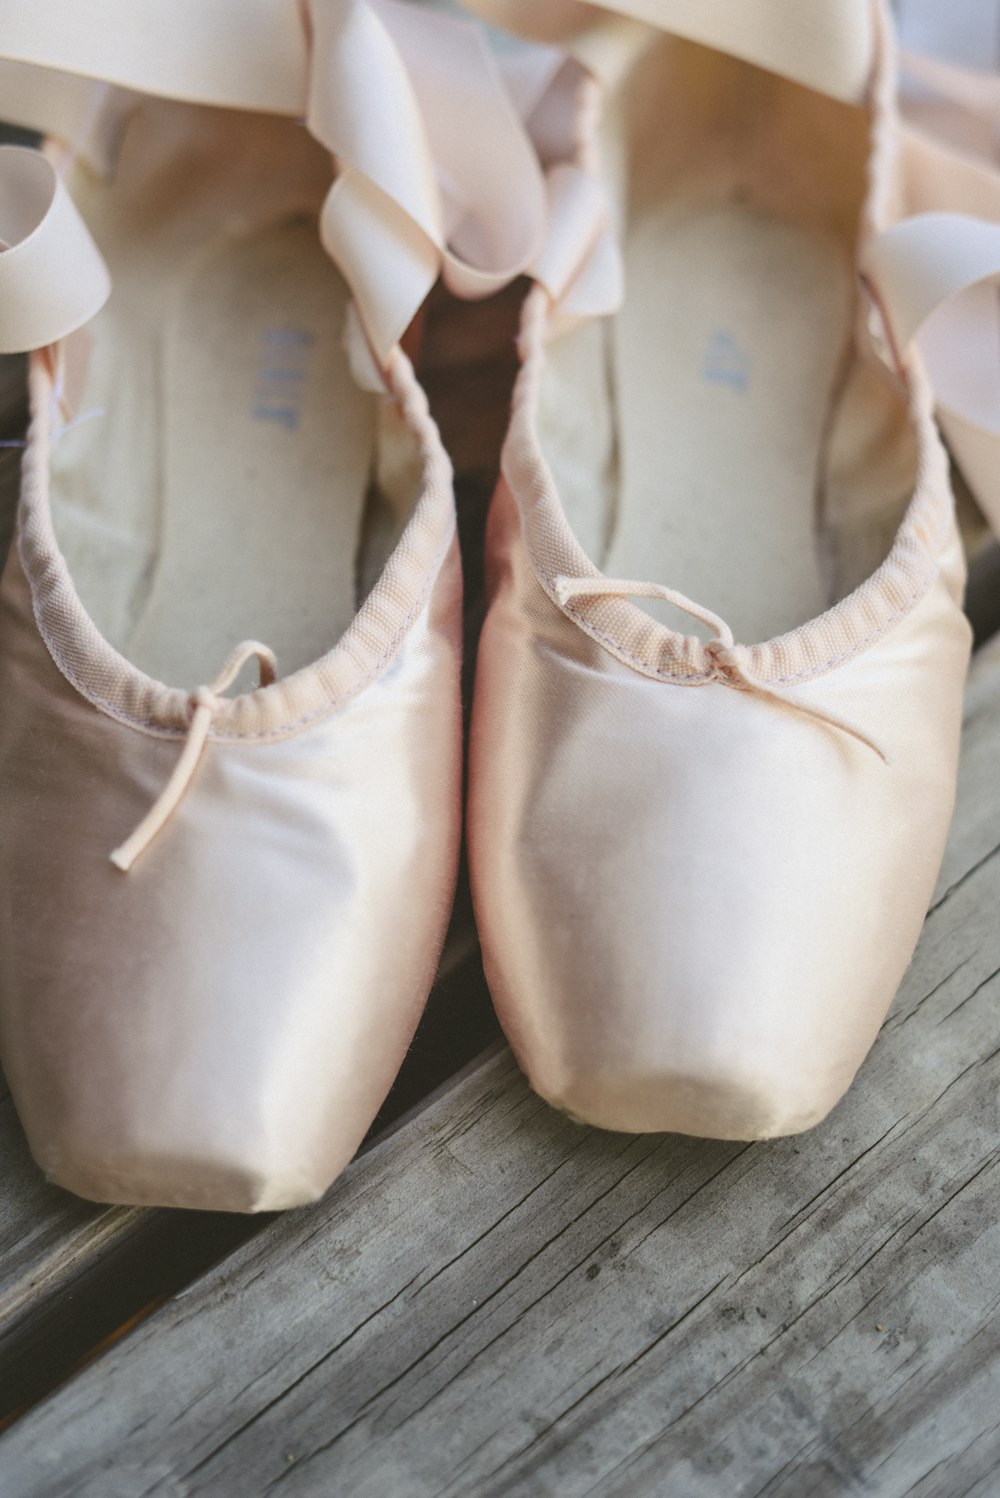 a close up of a pair of ballet shoes